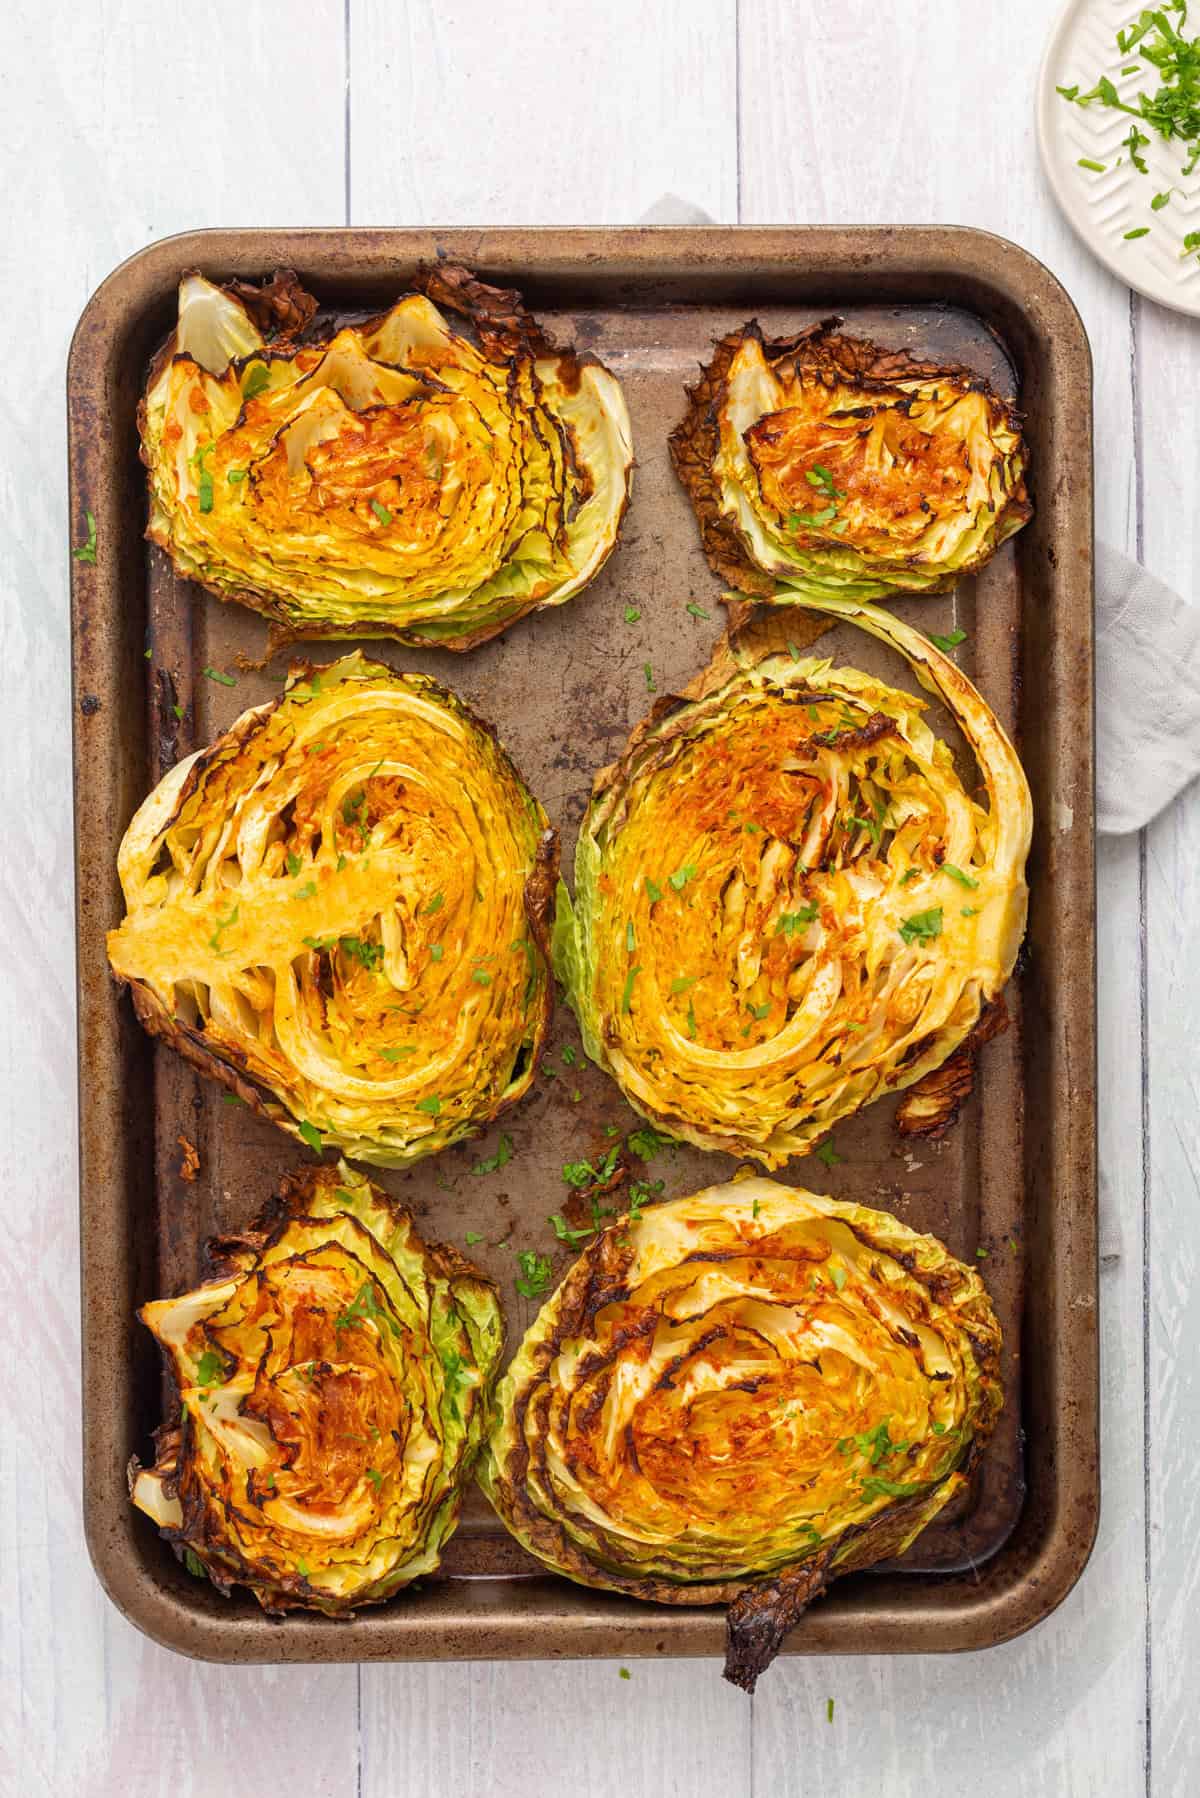 An overhead image of roasted cabbage steaks on a baking sheet.